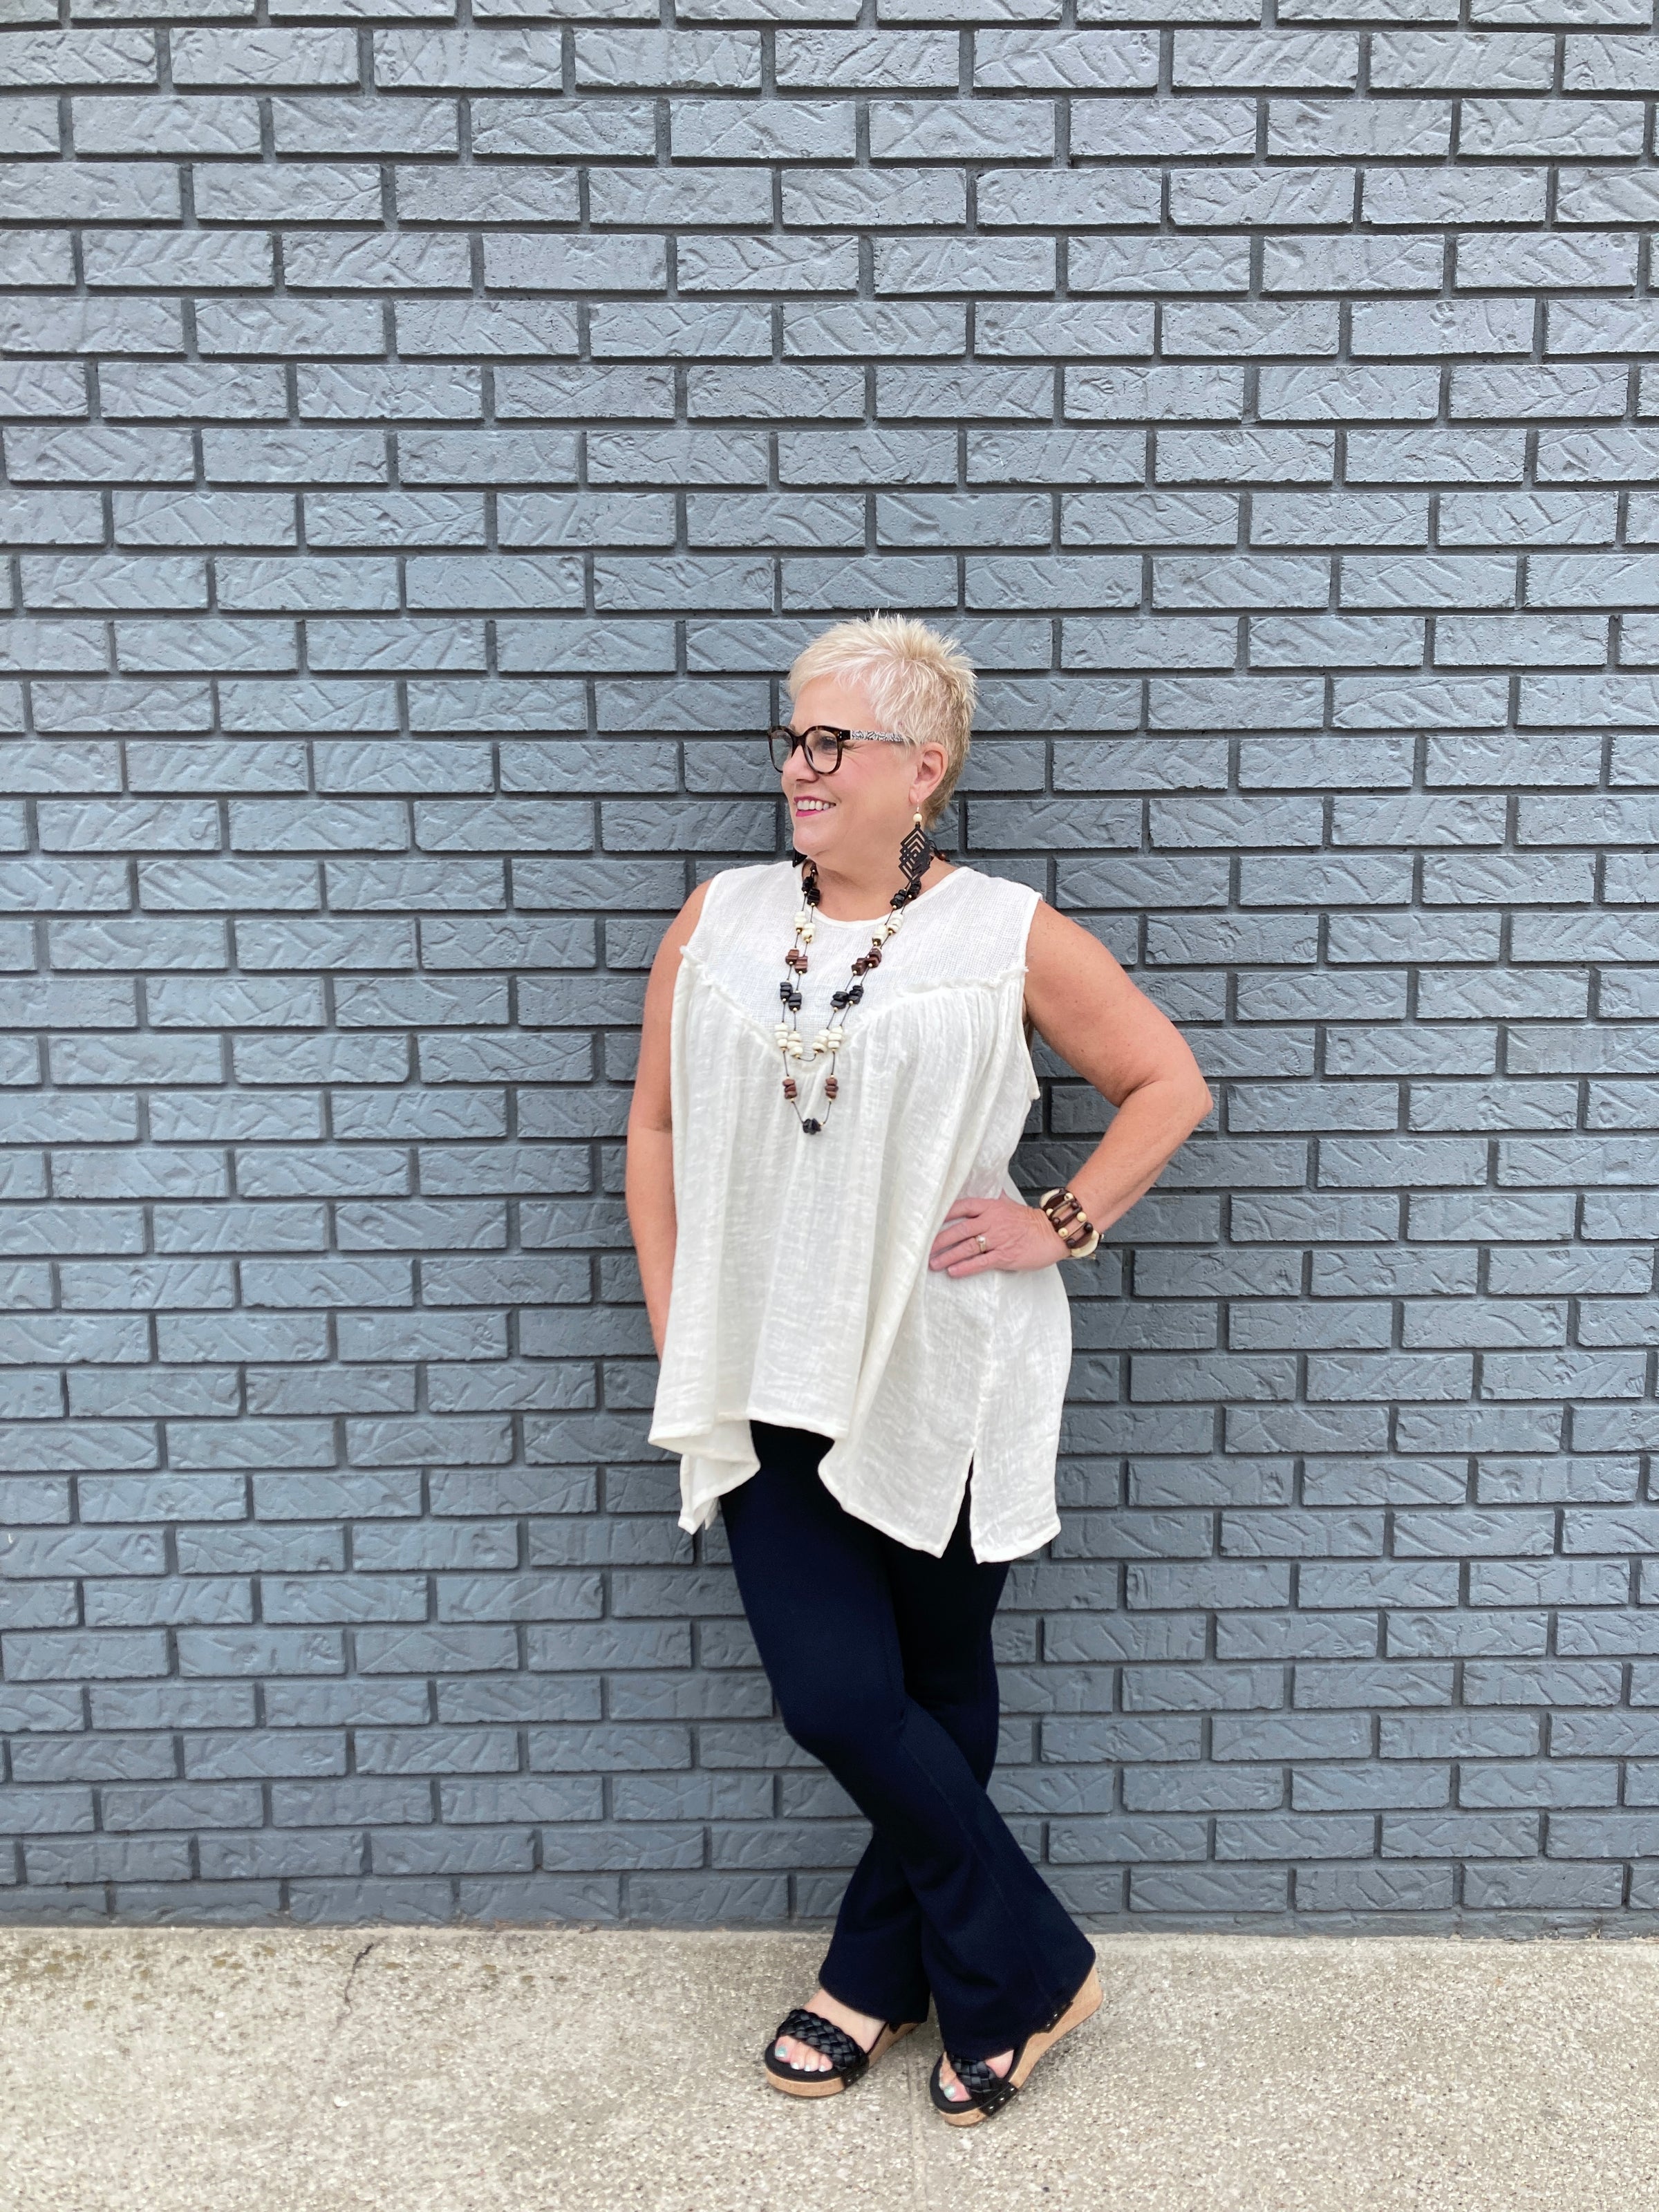 Fashion photo of a woman in her 50s with a pixie haircut. She has bleach blonde hair and is wearing a cream colored babydoll tank top with black flared leggings and black sandals. She looks very chic and trendy.